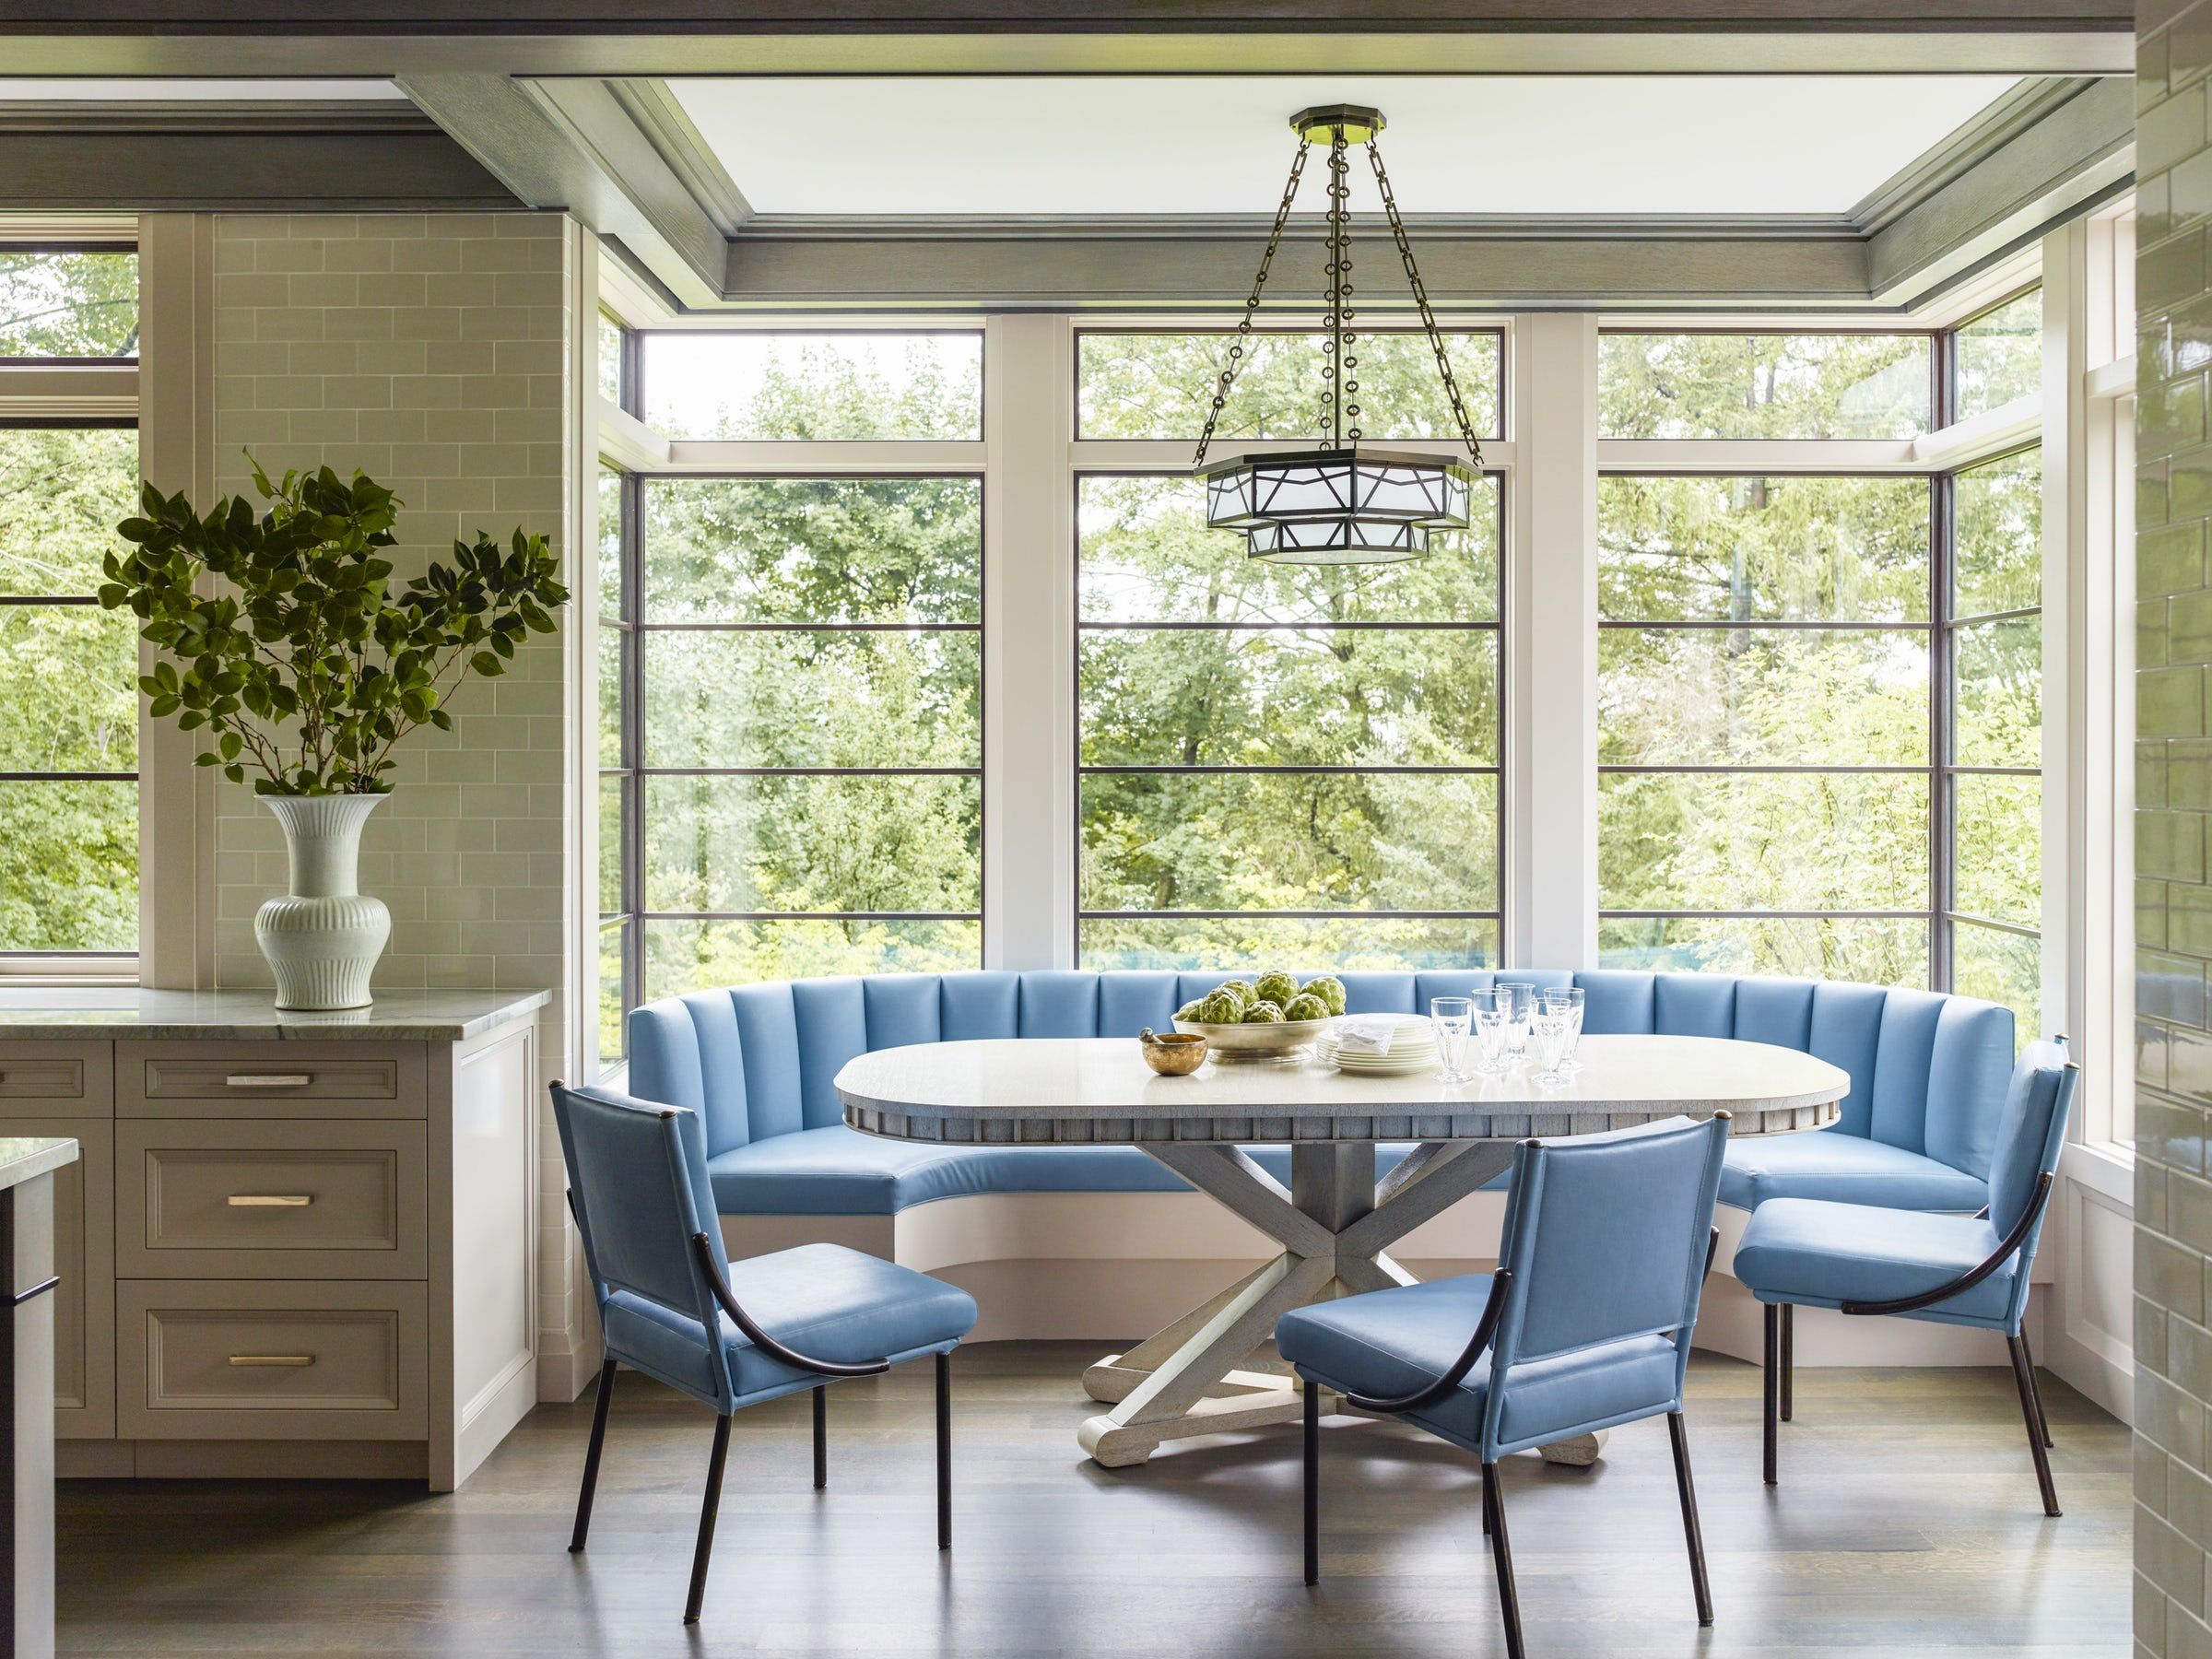 25 Charming Banquette Seating Ideas, Round Banquette Seating